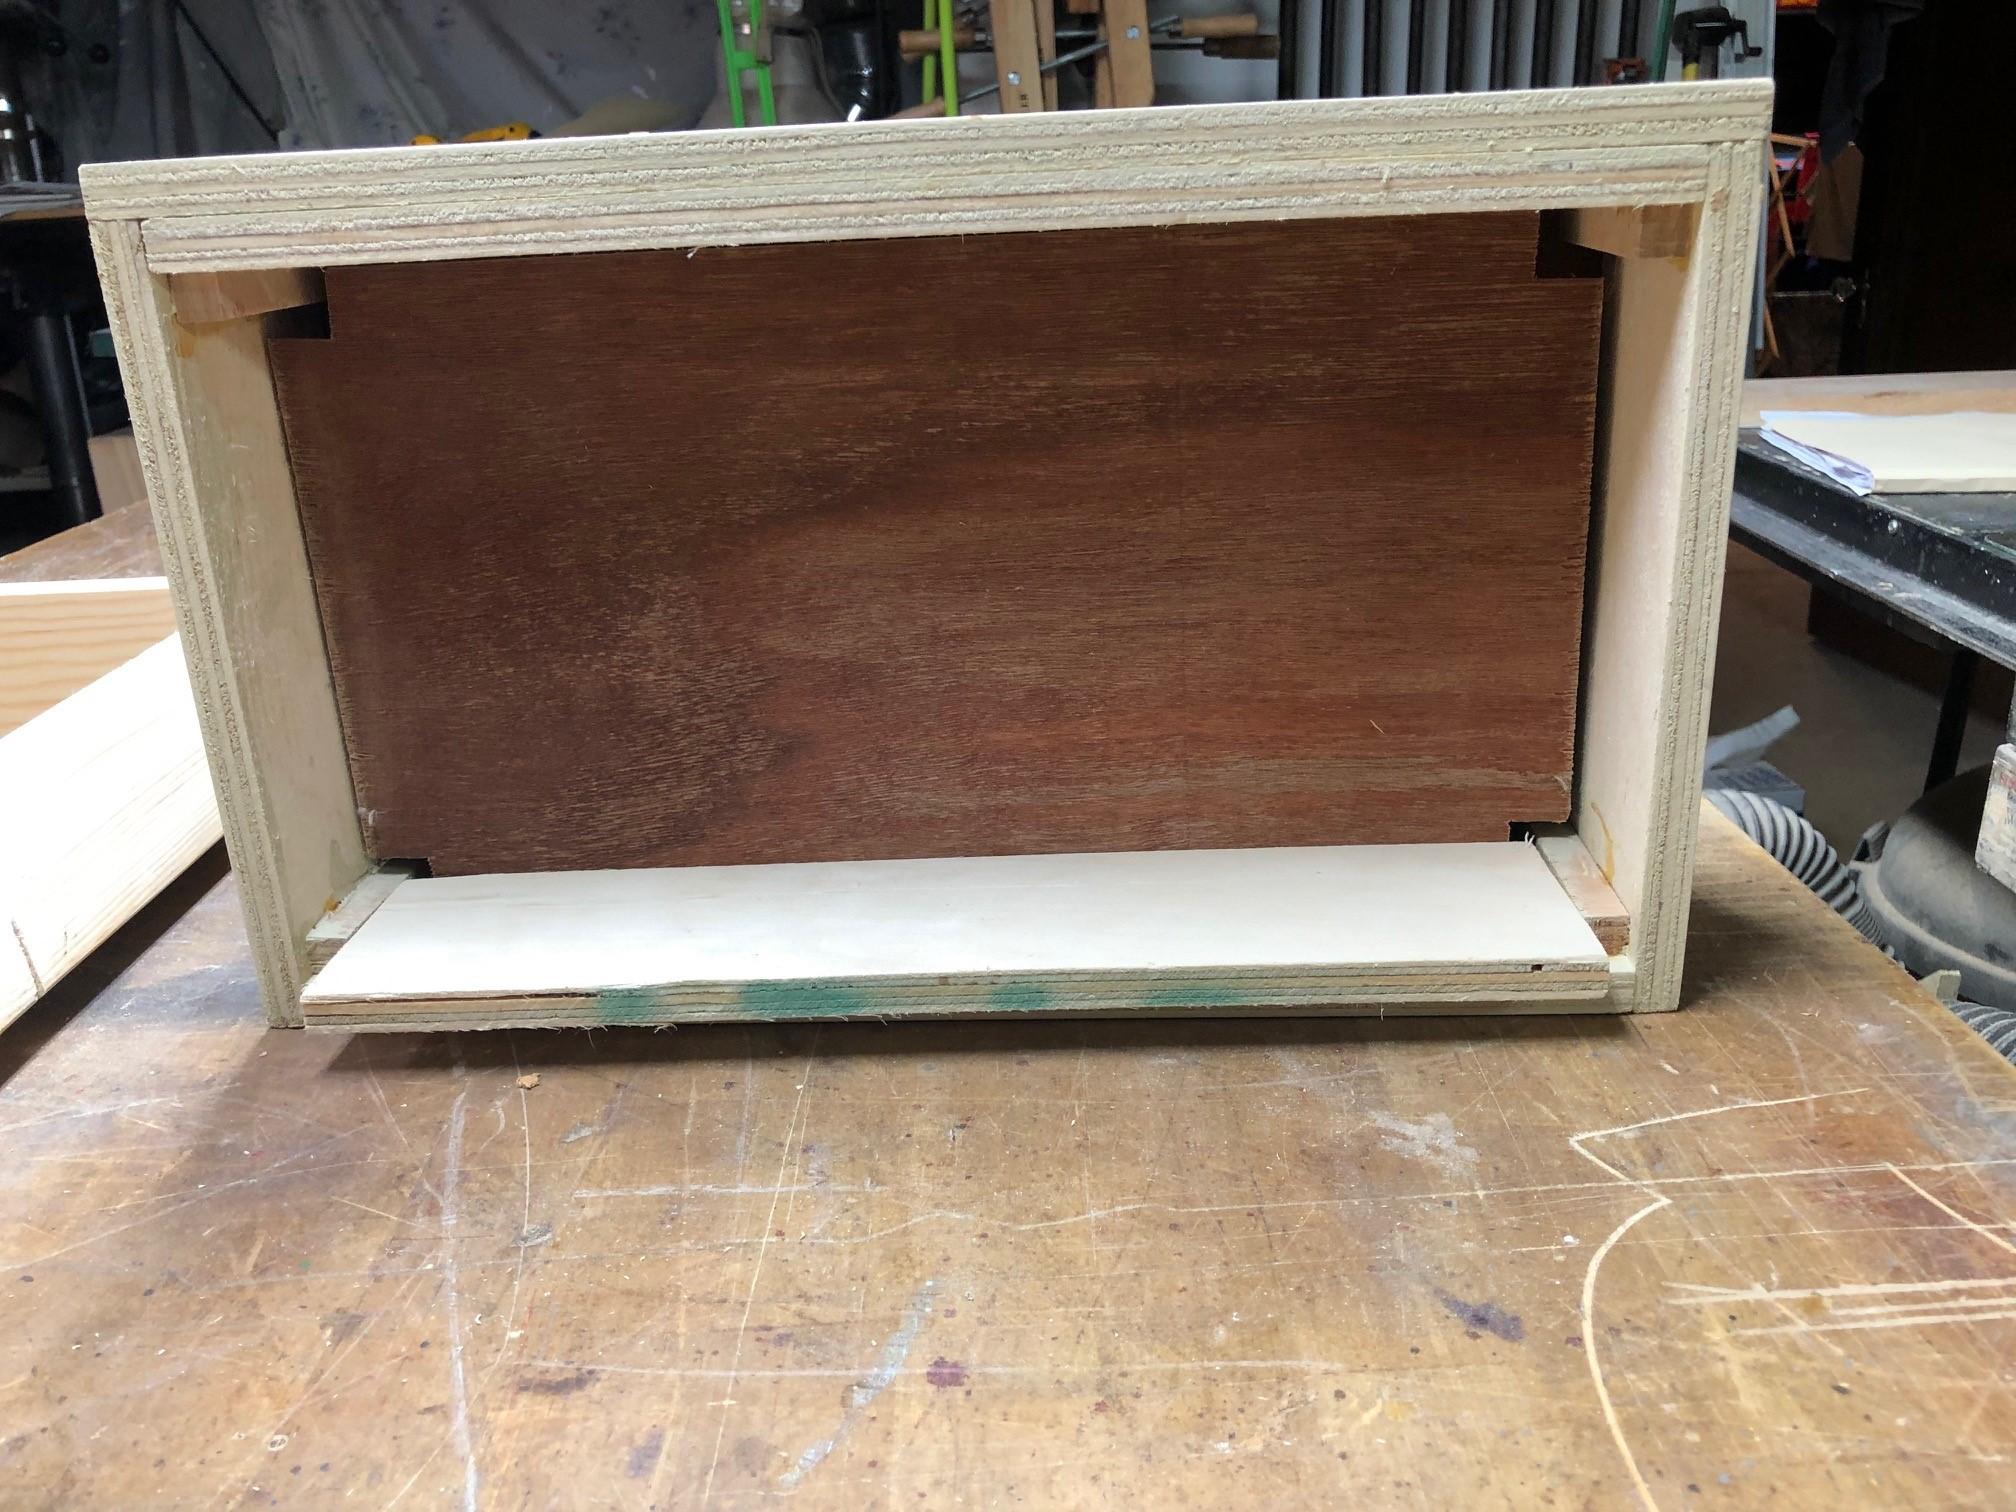 Scoreboard Case 4 with mounting board for electronics 2.jpg